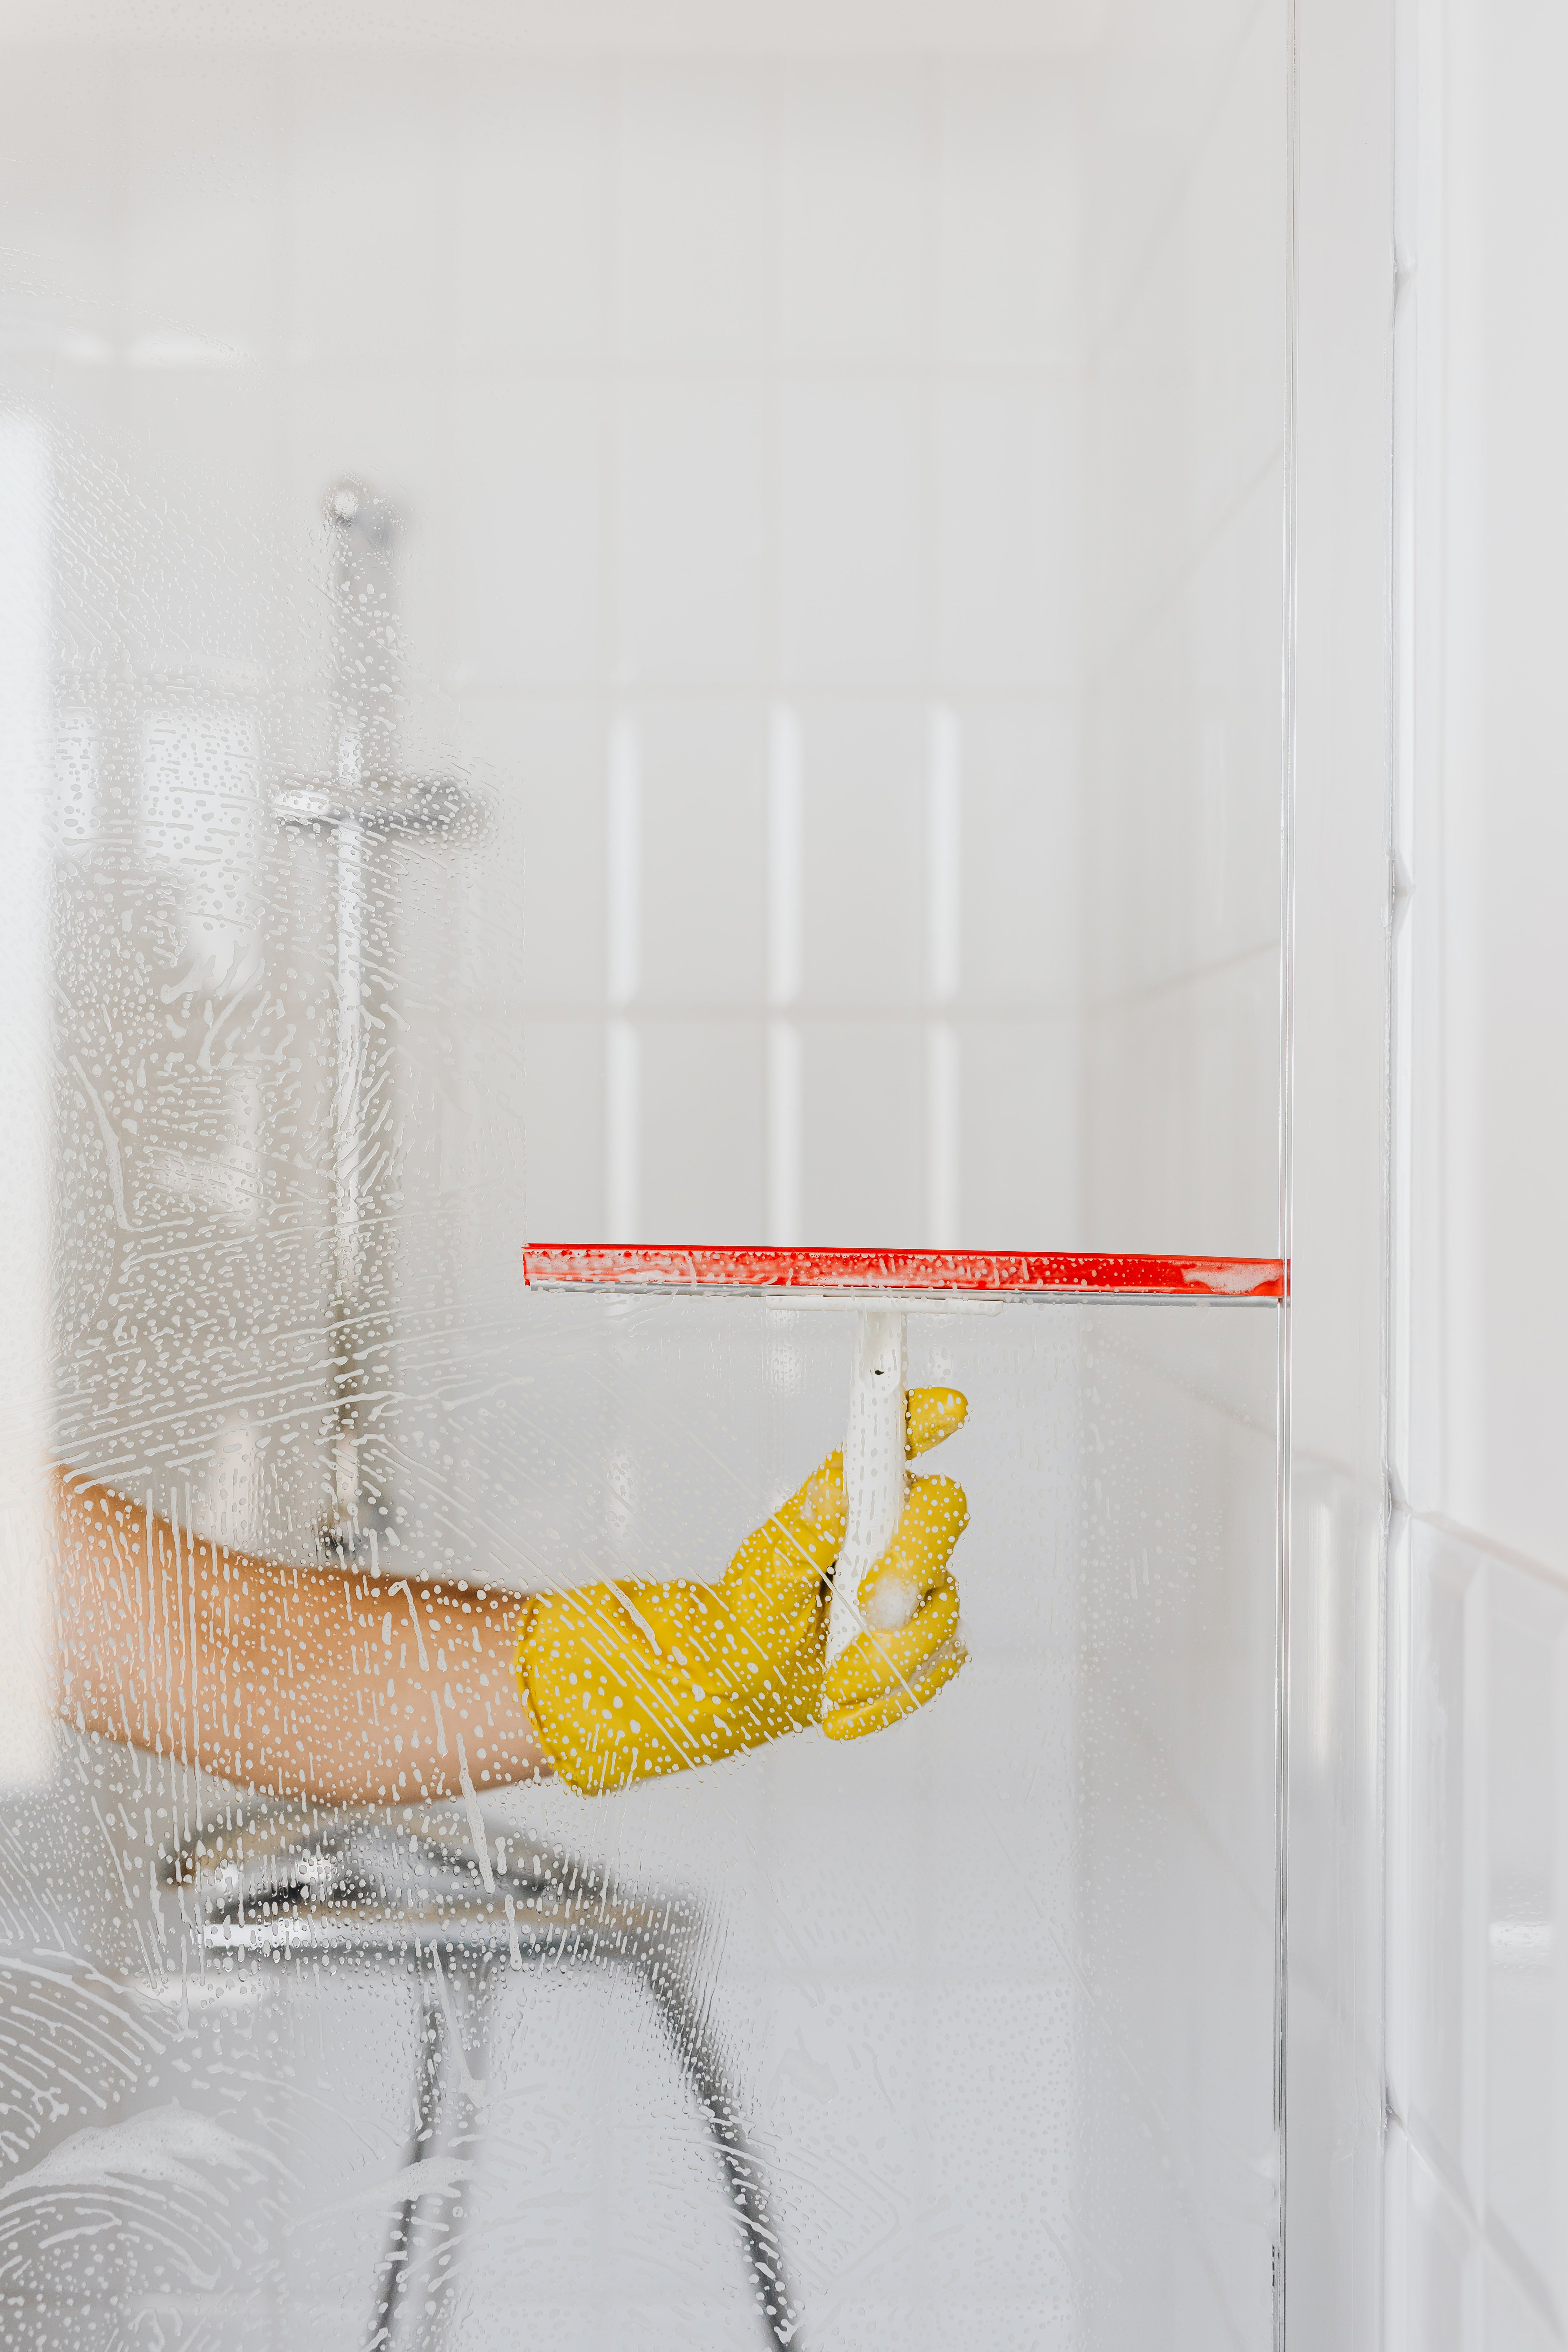 squeege on shower screen to rinse off excess water